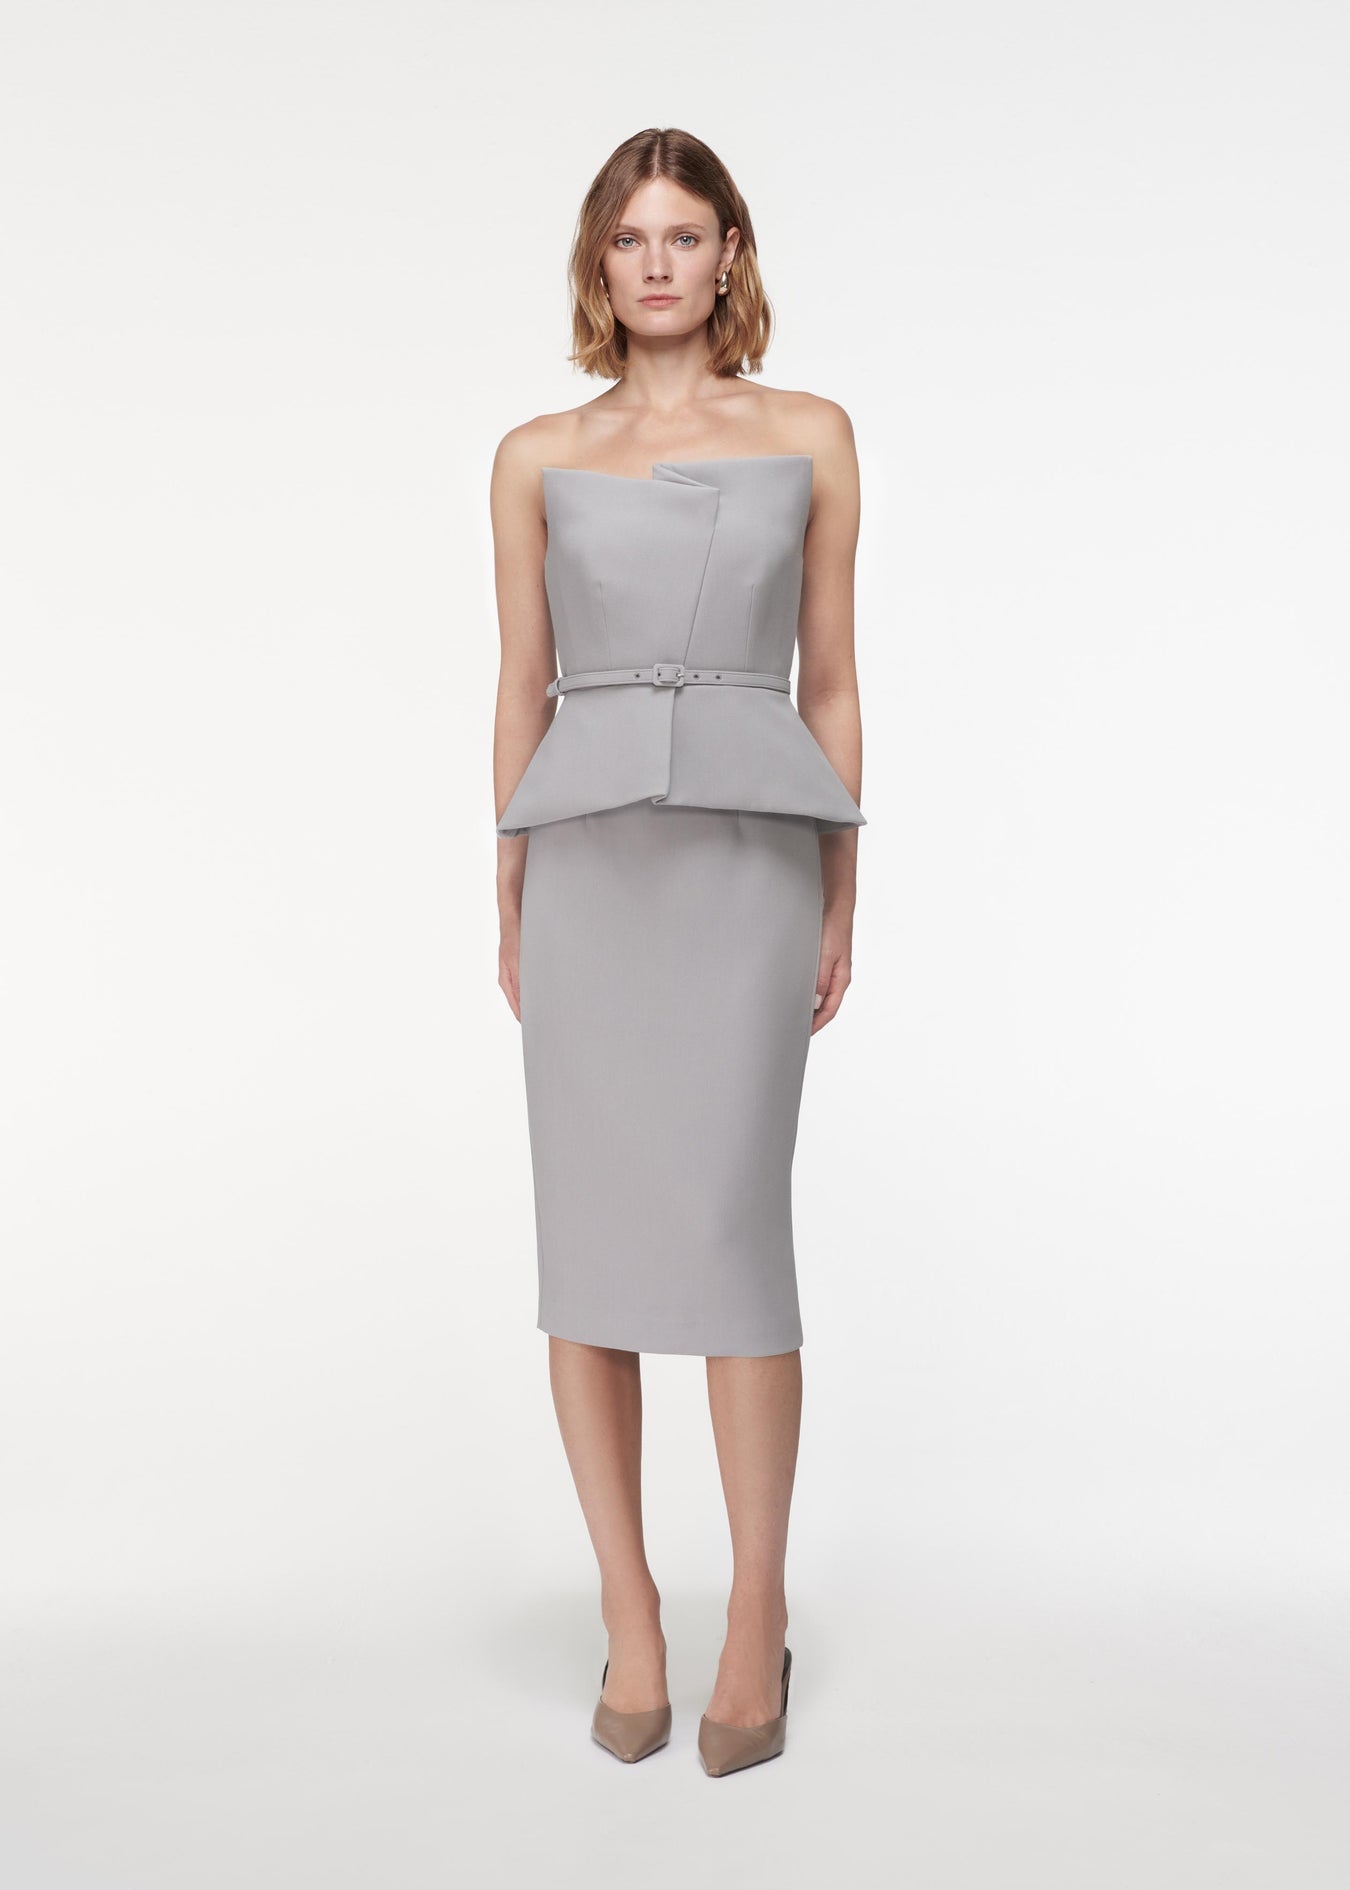 A photograph of a woman wearing a Crepe Midi Skirt in Grey